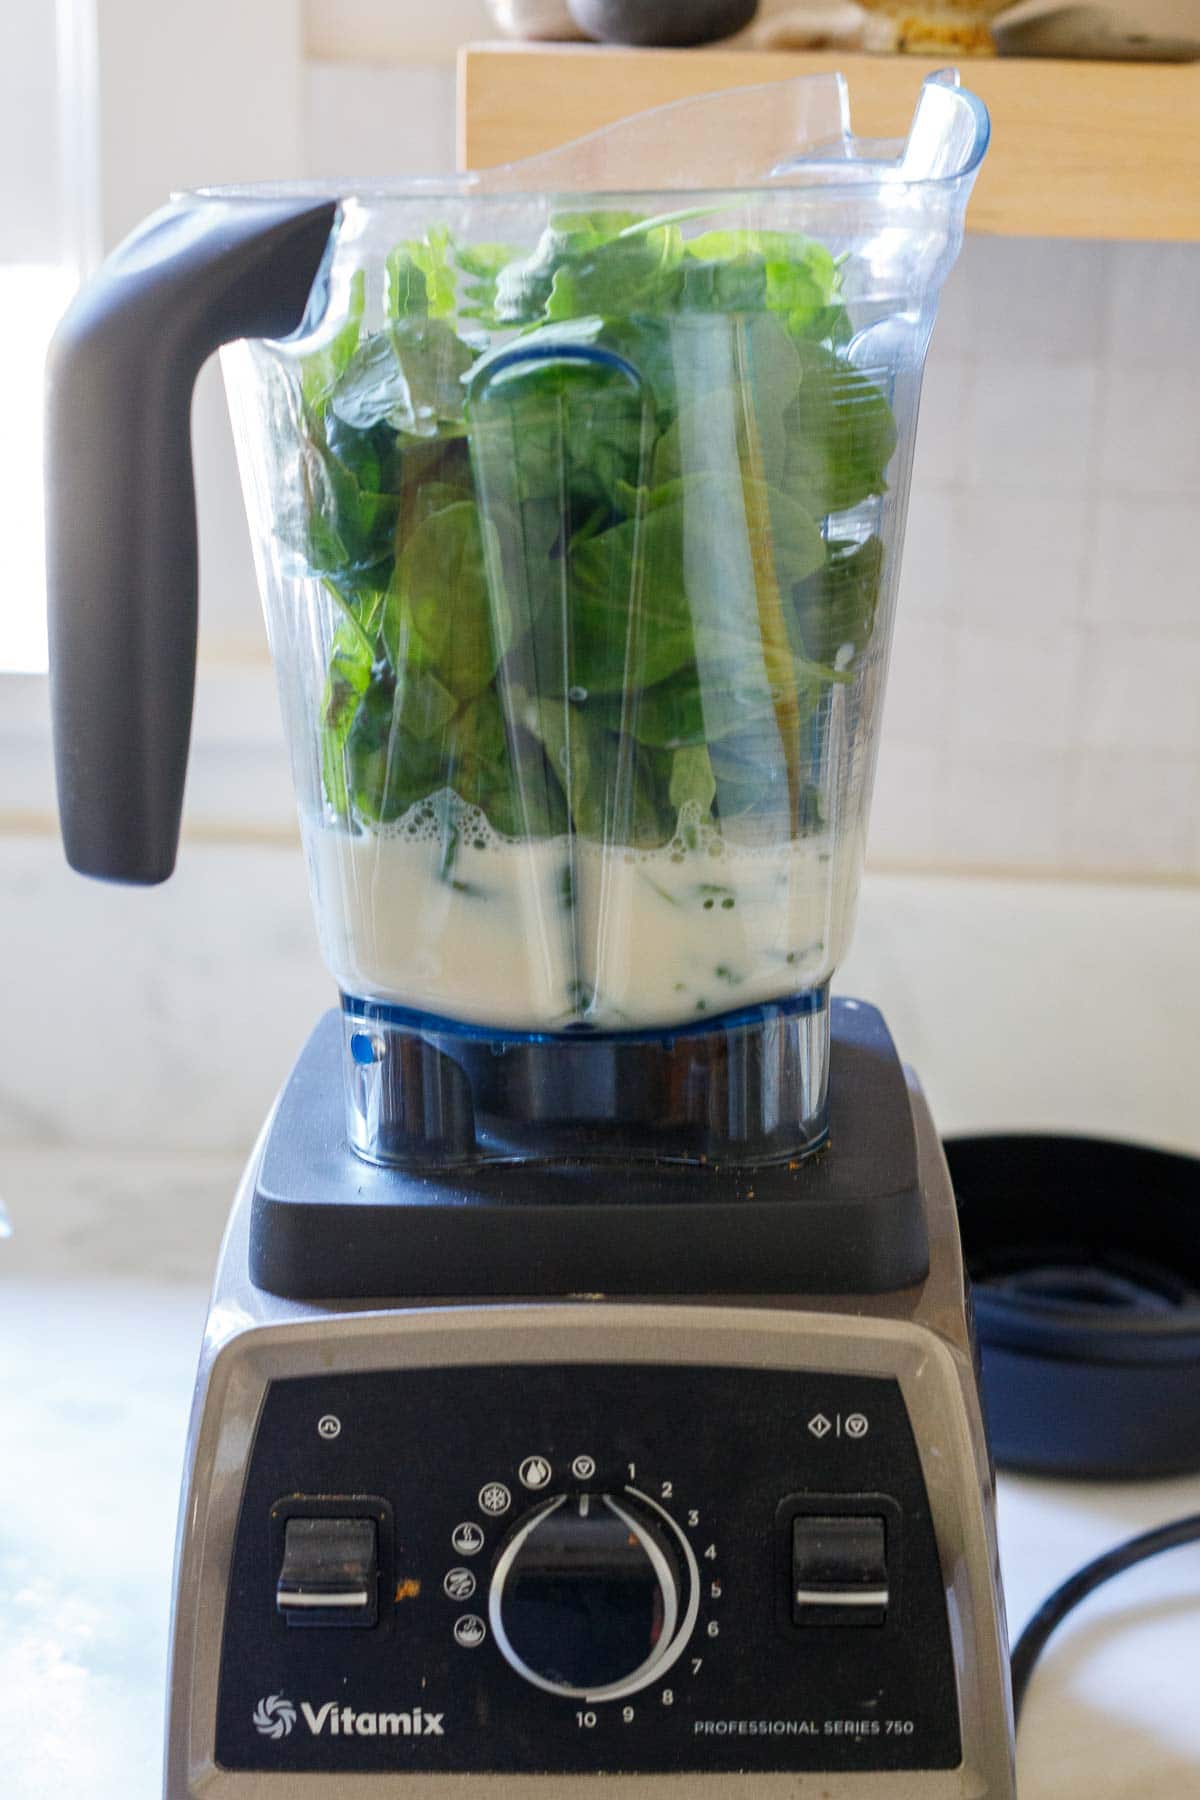 Blending spinach sauce ingredients. 